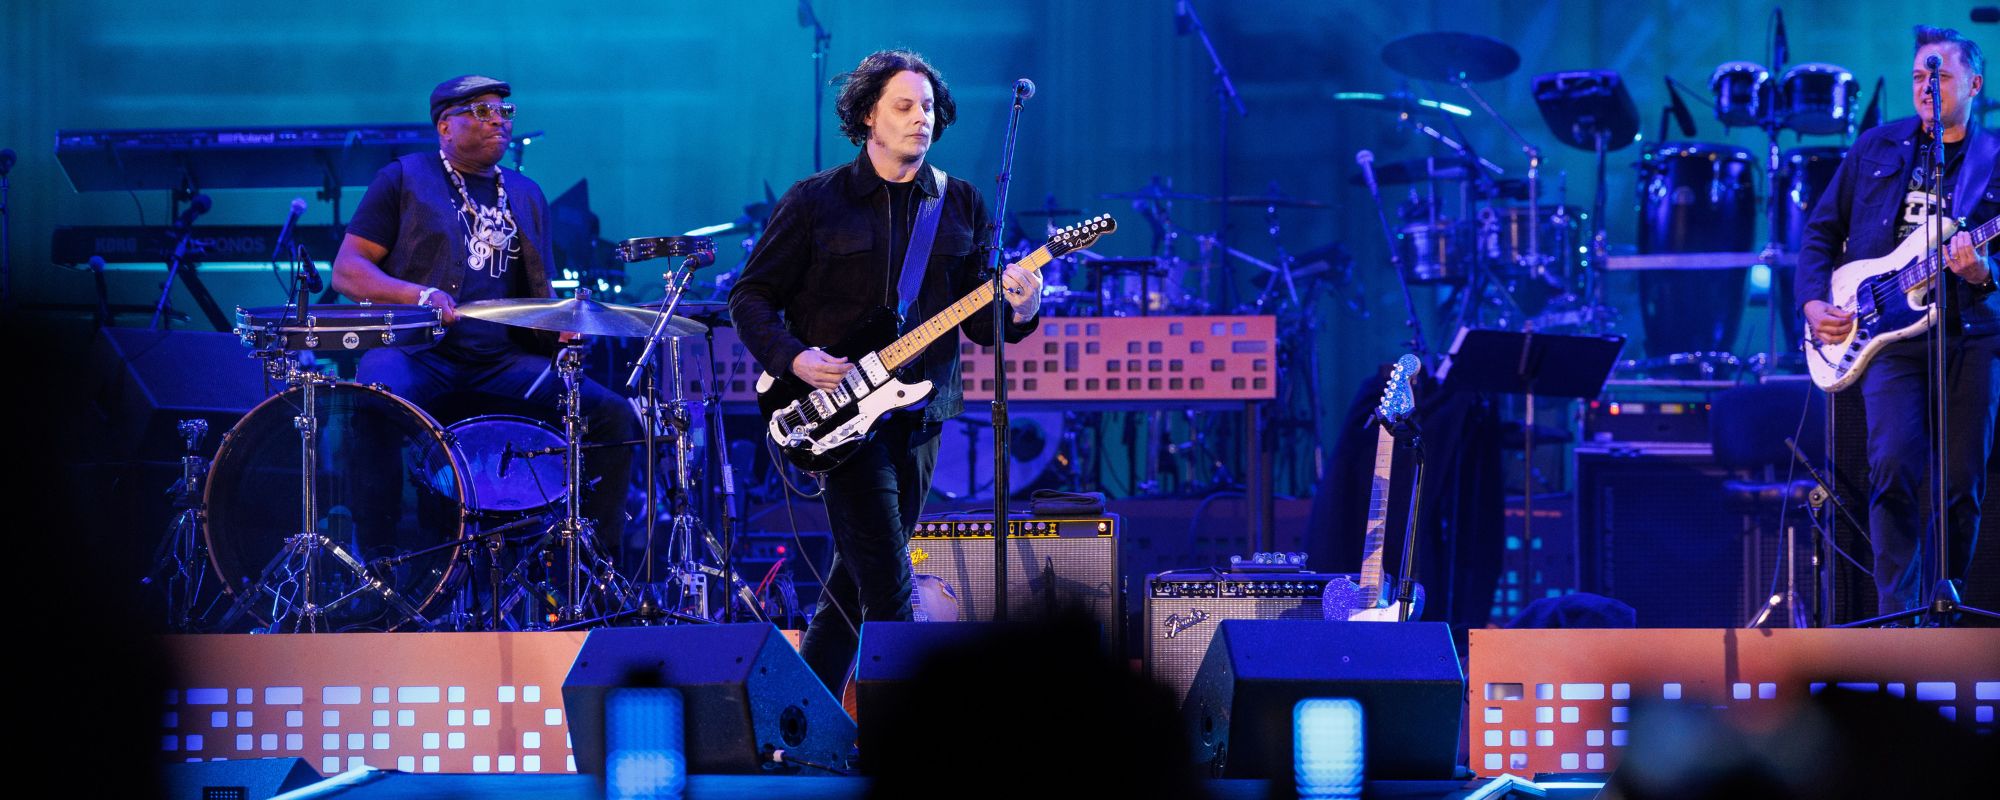 Jack White Previews New Music During Intimate Nashville Show, Delivers Conan O’Brien Duet at Newport Folk Festival